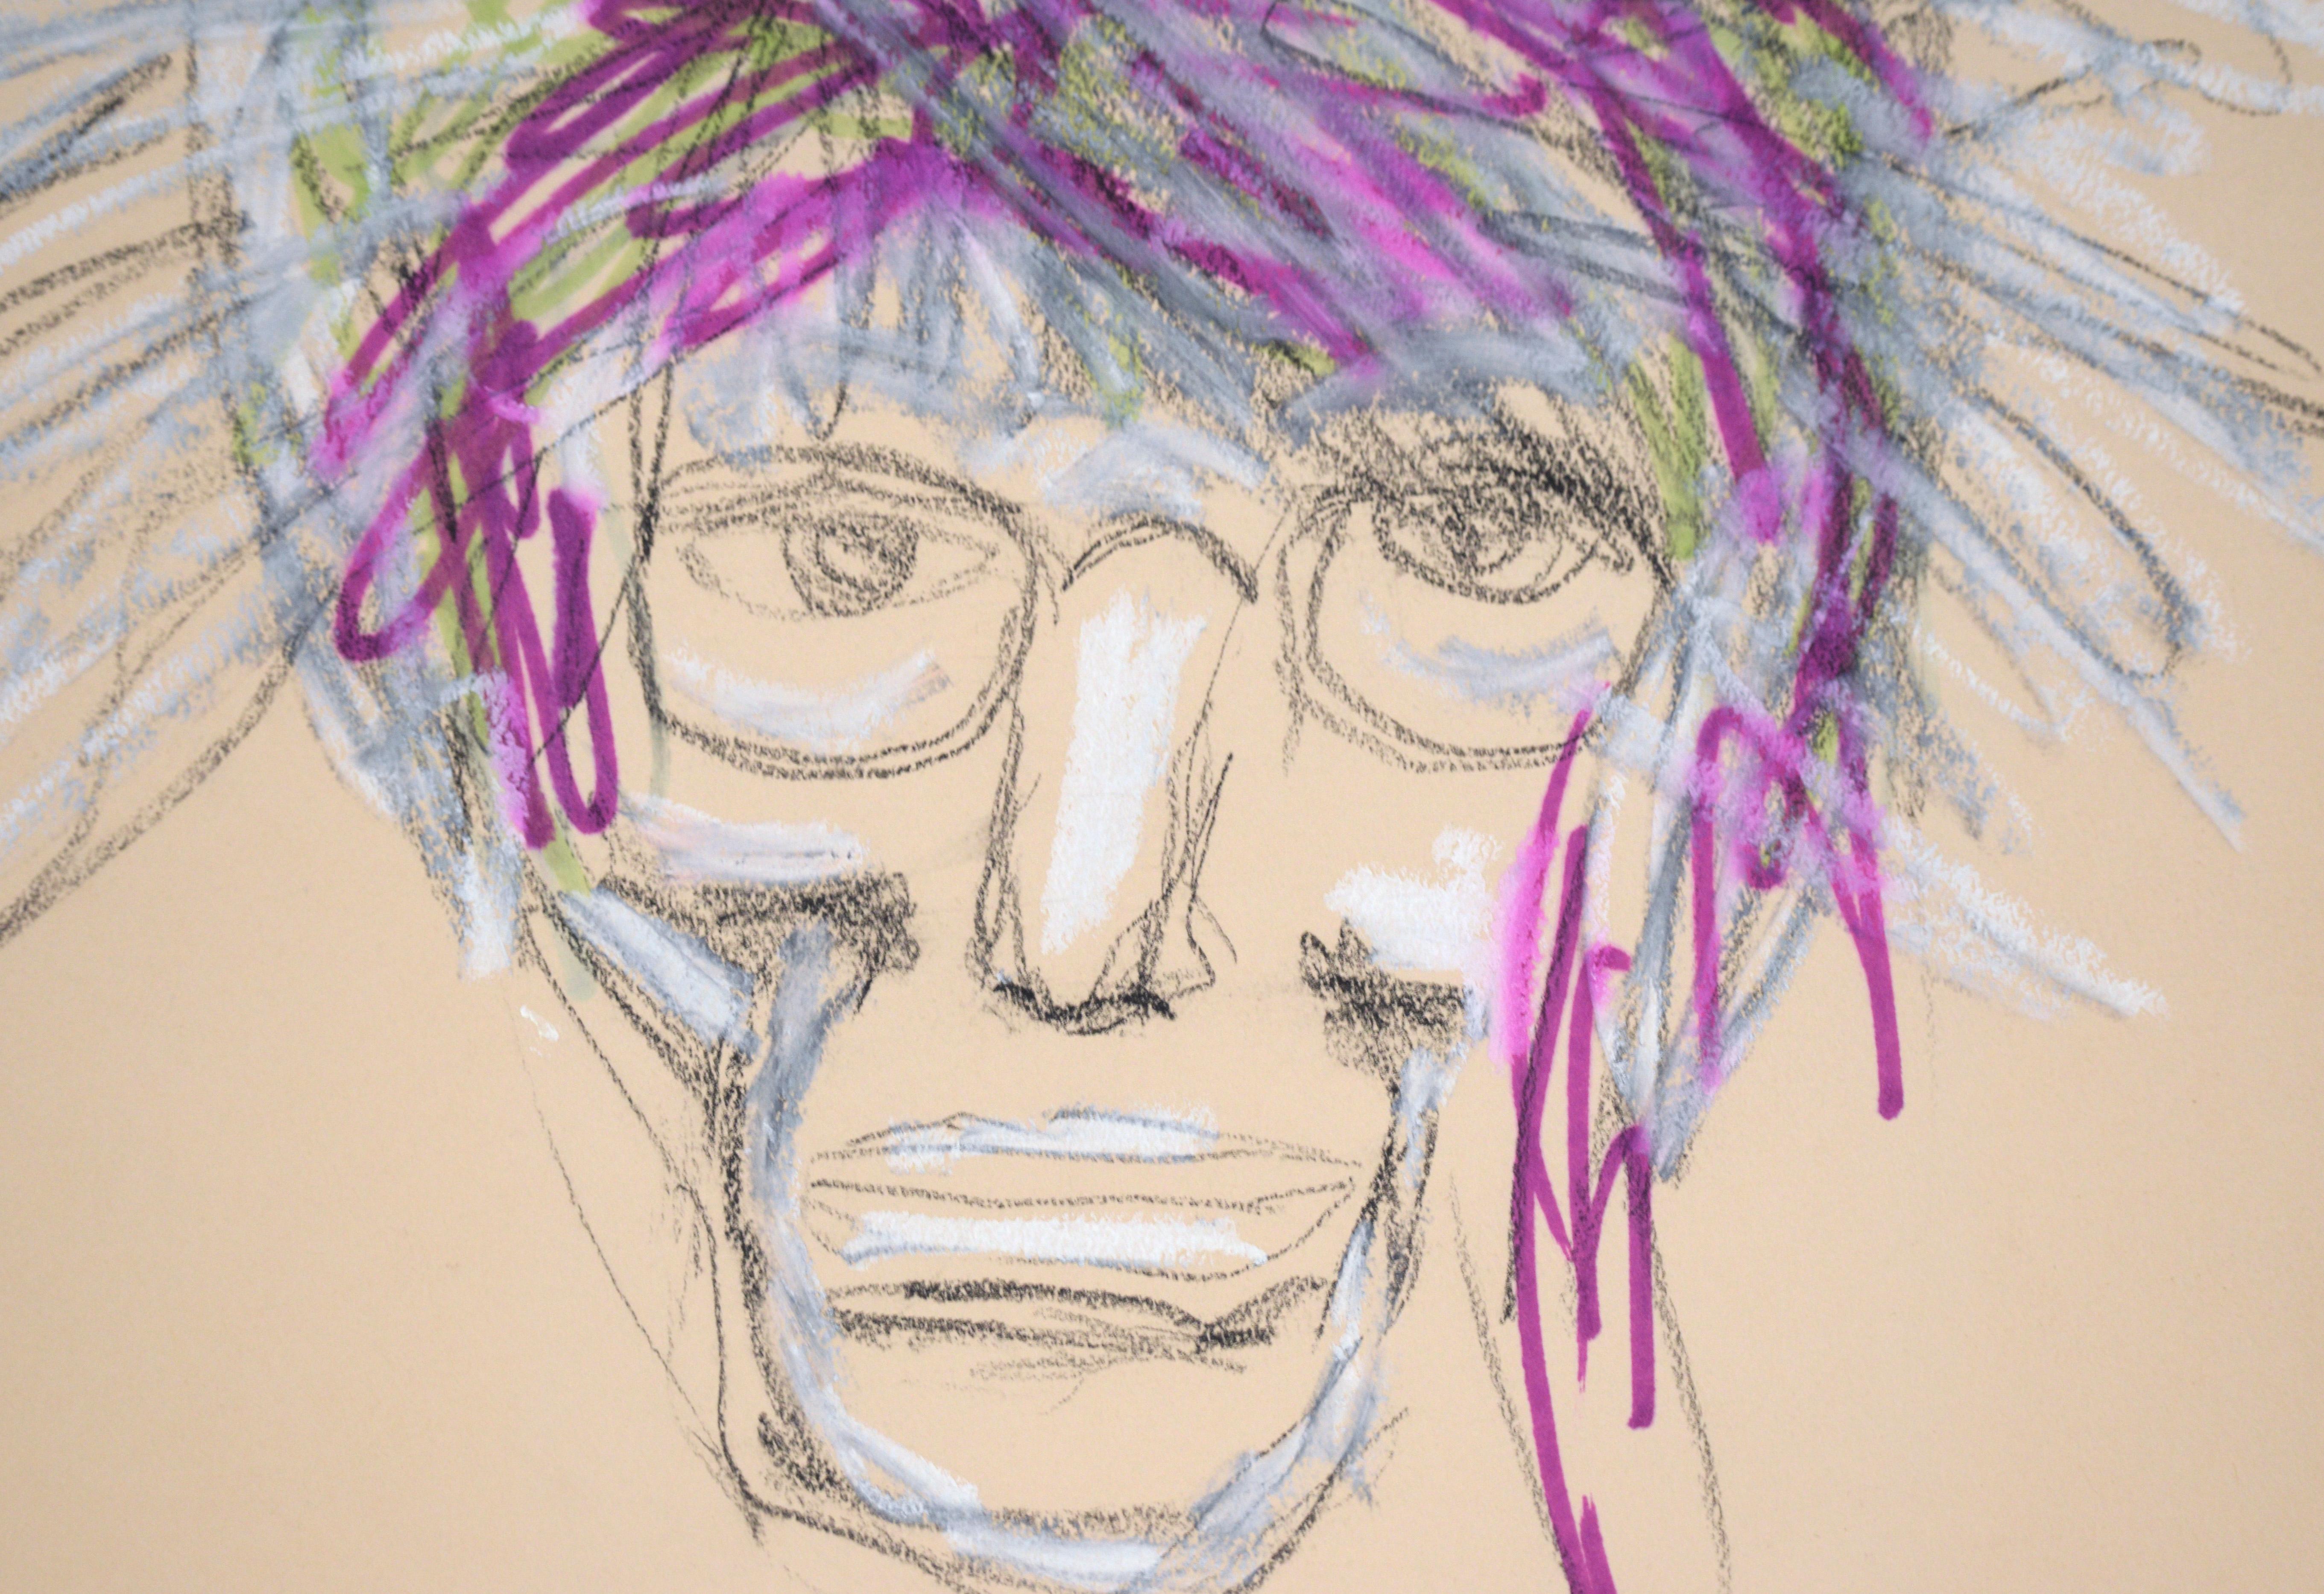 Portrait of Andy Warhol with Purple Hair in Pastel and Gouache on Paper

Whimsical portrait by Ricardo de Silva (Brazilian, 20th Century). Andy Warhol is looking directly at the viewer with wild purple, white, and green hair. Above his head are the